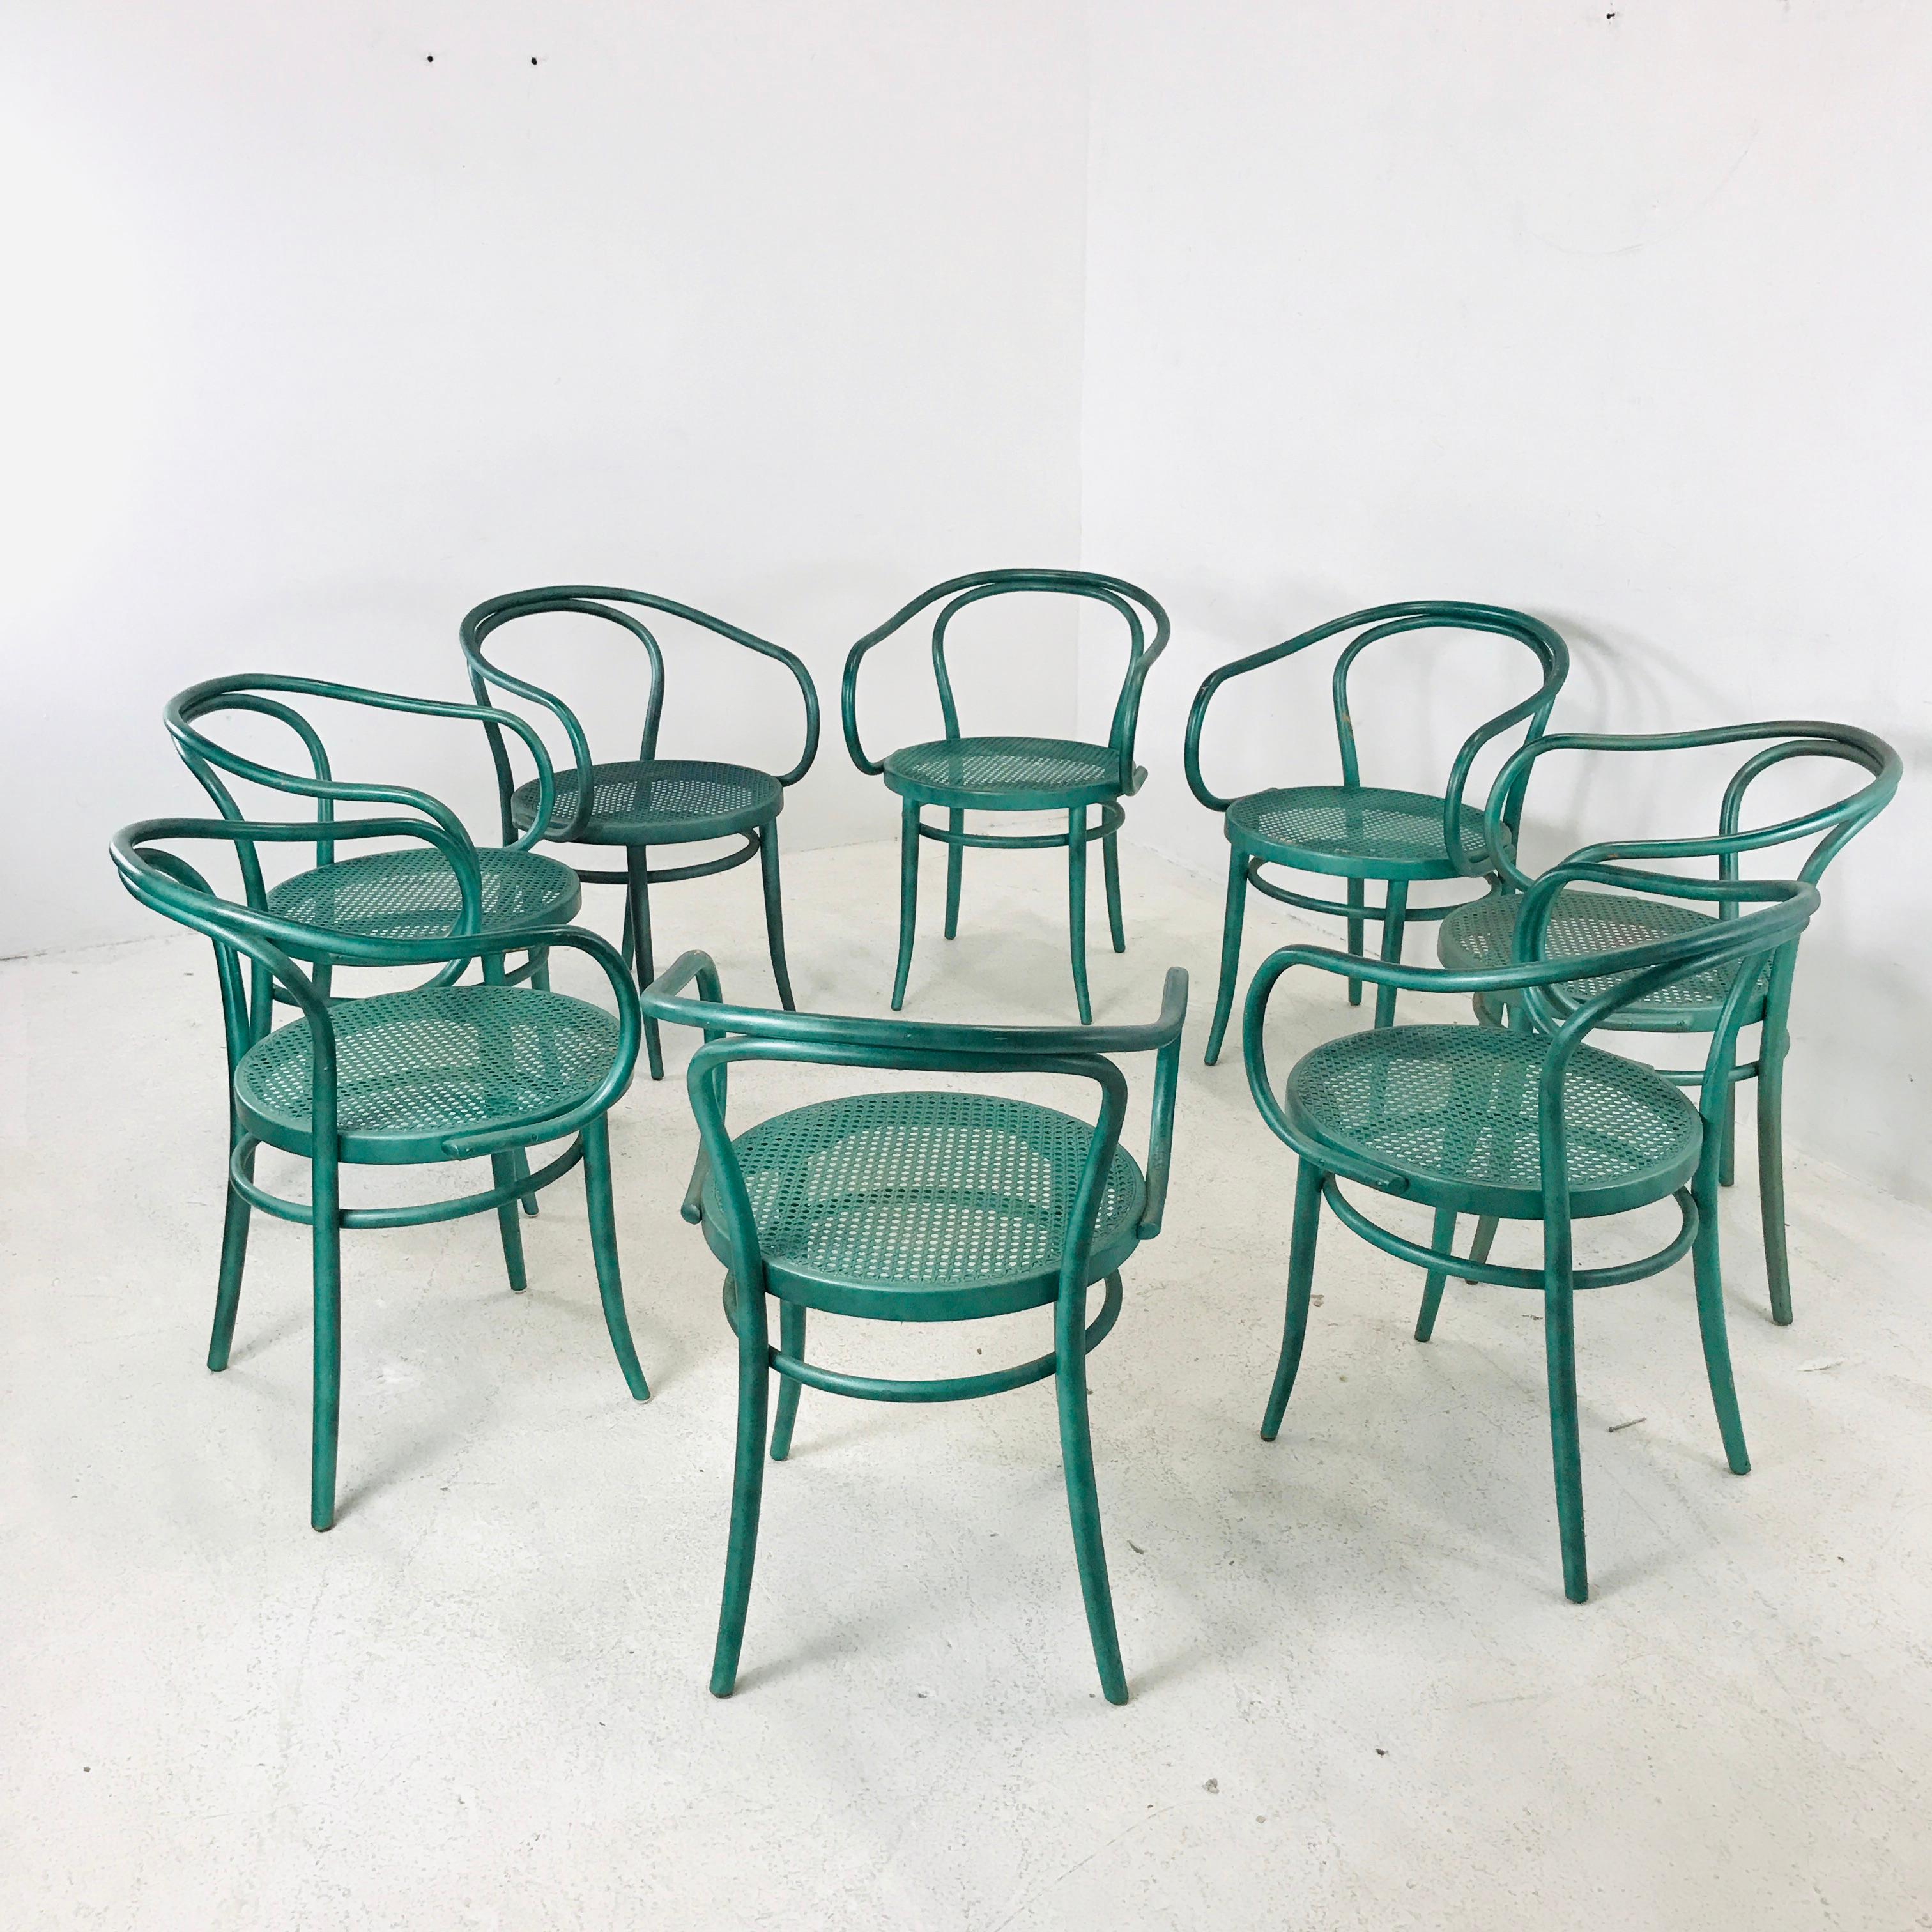 Set of 8 Thonet bentwood dining chairs with removable cushions. In good vintage condition with visible wear due to use.
Refinishing is recommended.